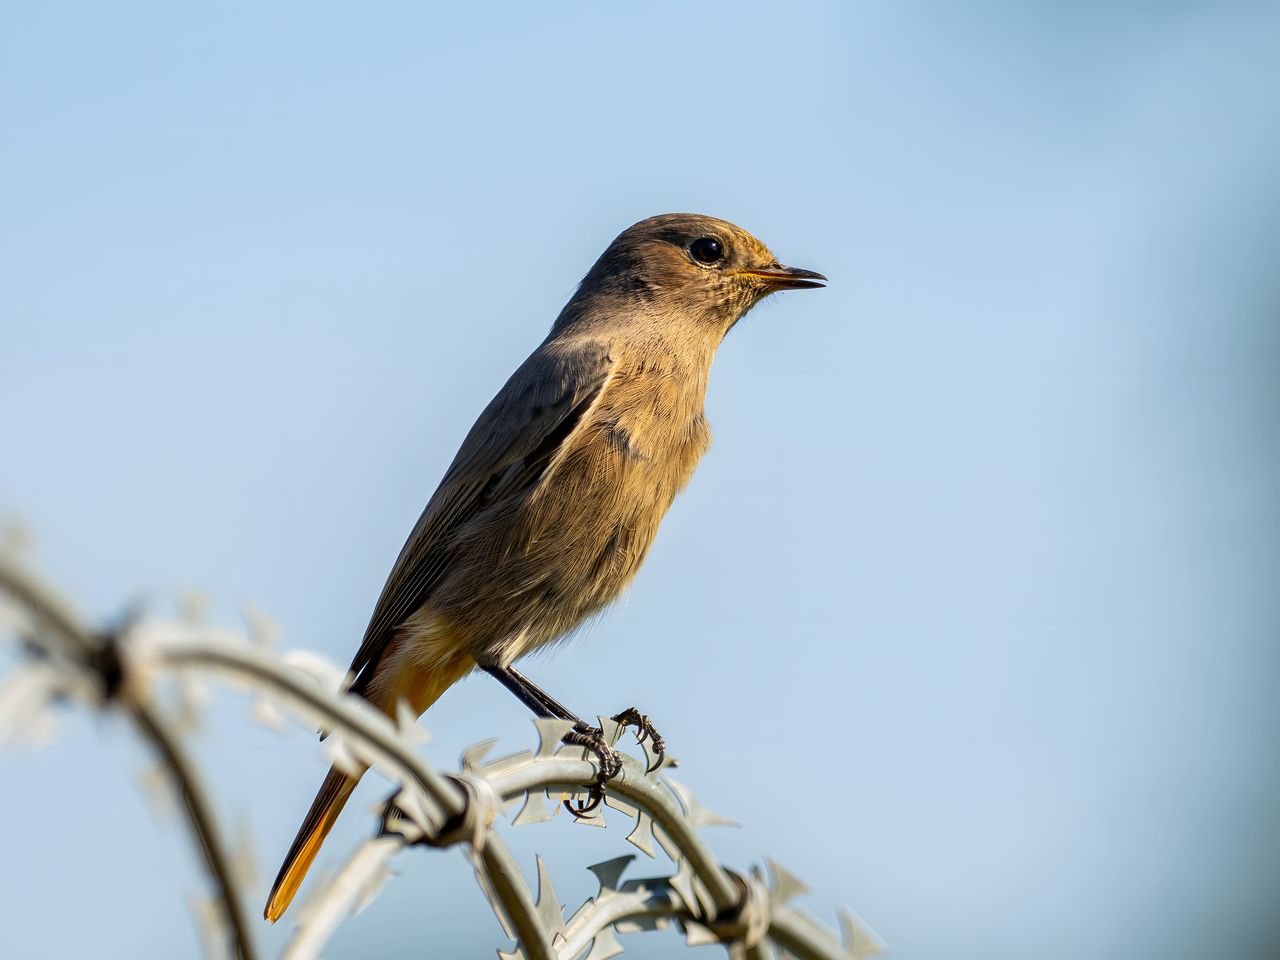 bird, animal themes, animal, animal wildlife, wildlife, one animal, beak, nature, perching, branch, close-up, robin, no people, day, songbird, outdoors, sky, sunny, full length, clear sky, plant, sparrow, focus on foreground, selective focus